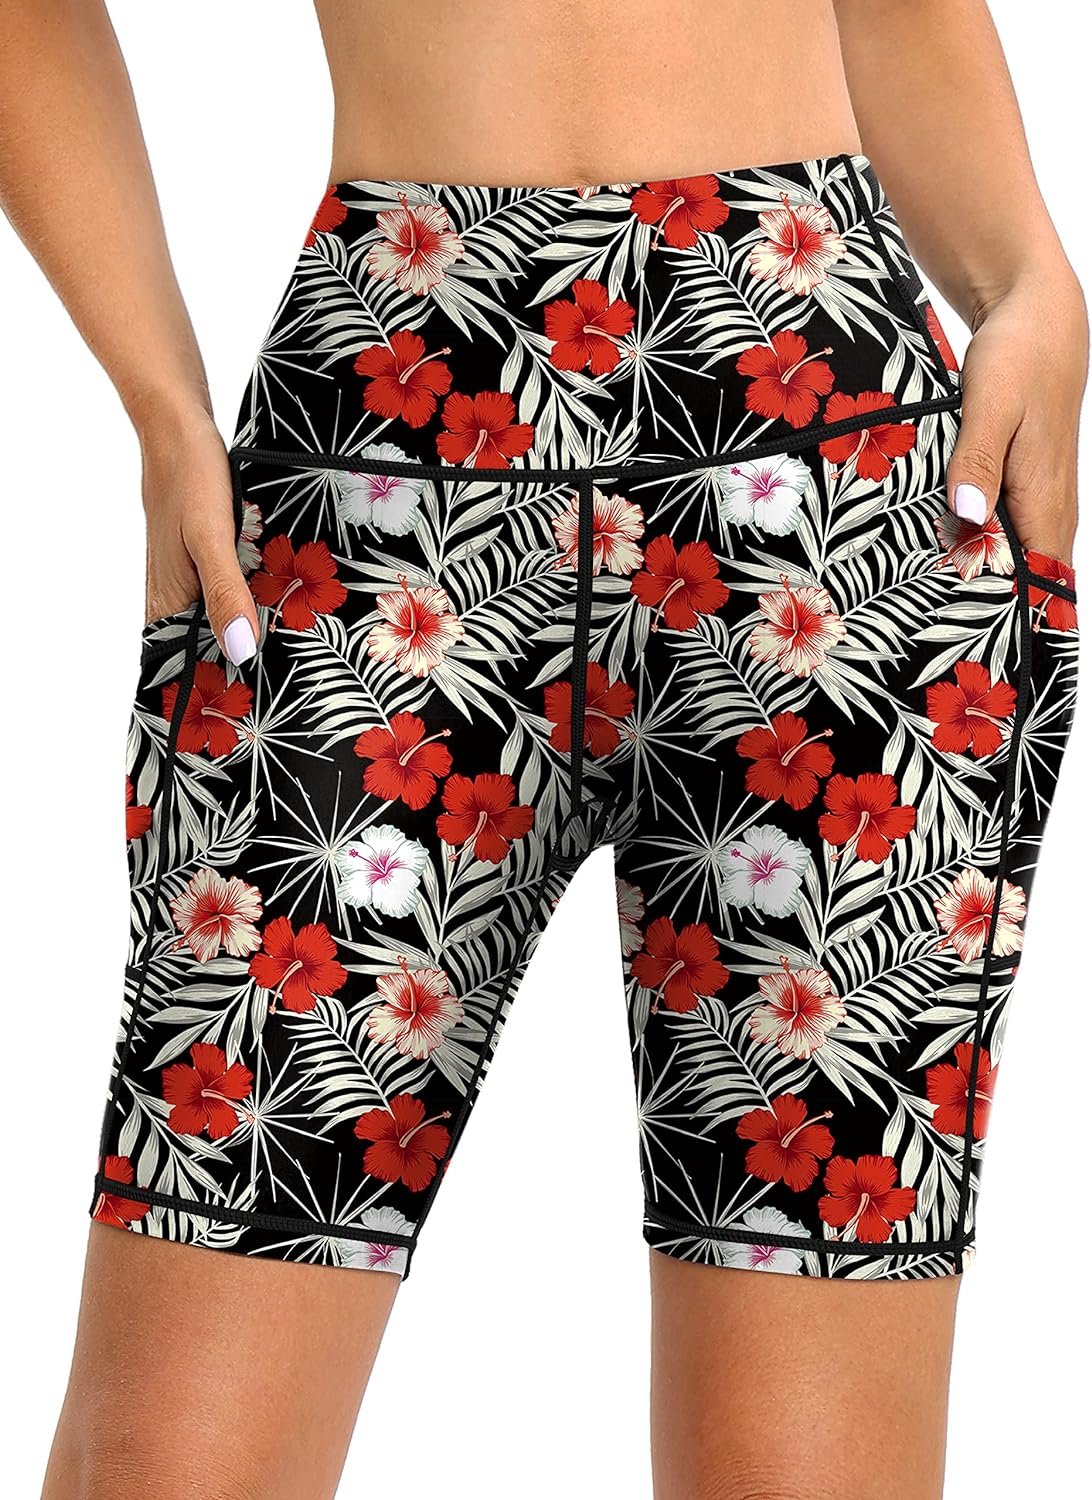 Womens 5/7/9 Swim Shorts UPF 50+ High Waisted Board Shorts with Pockets Liner Quick Dry Swimsuit Bottoms